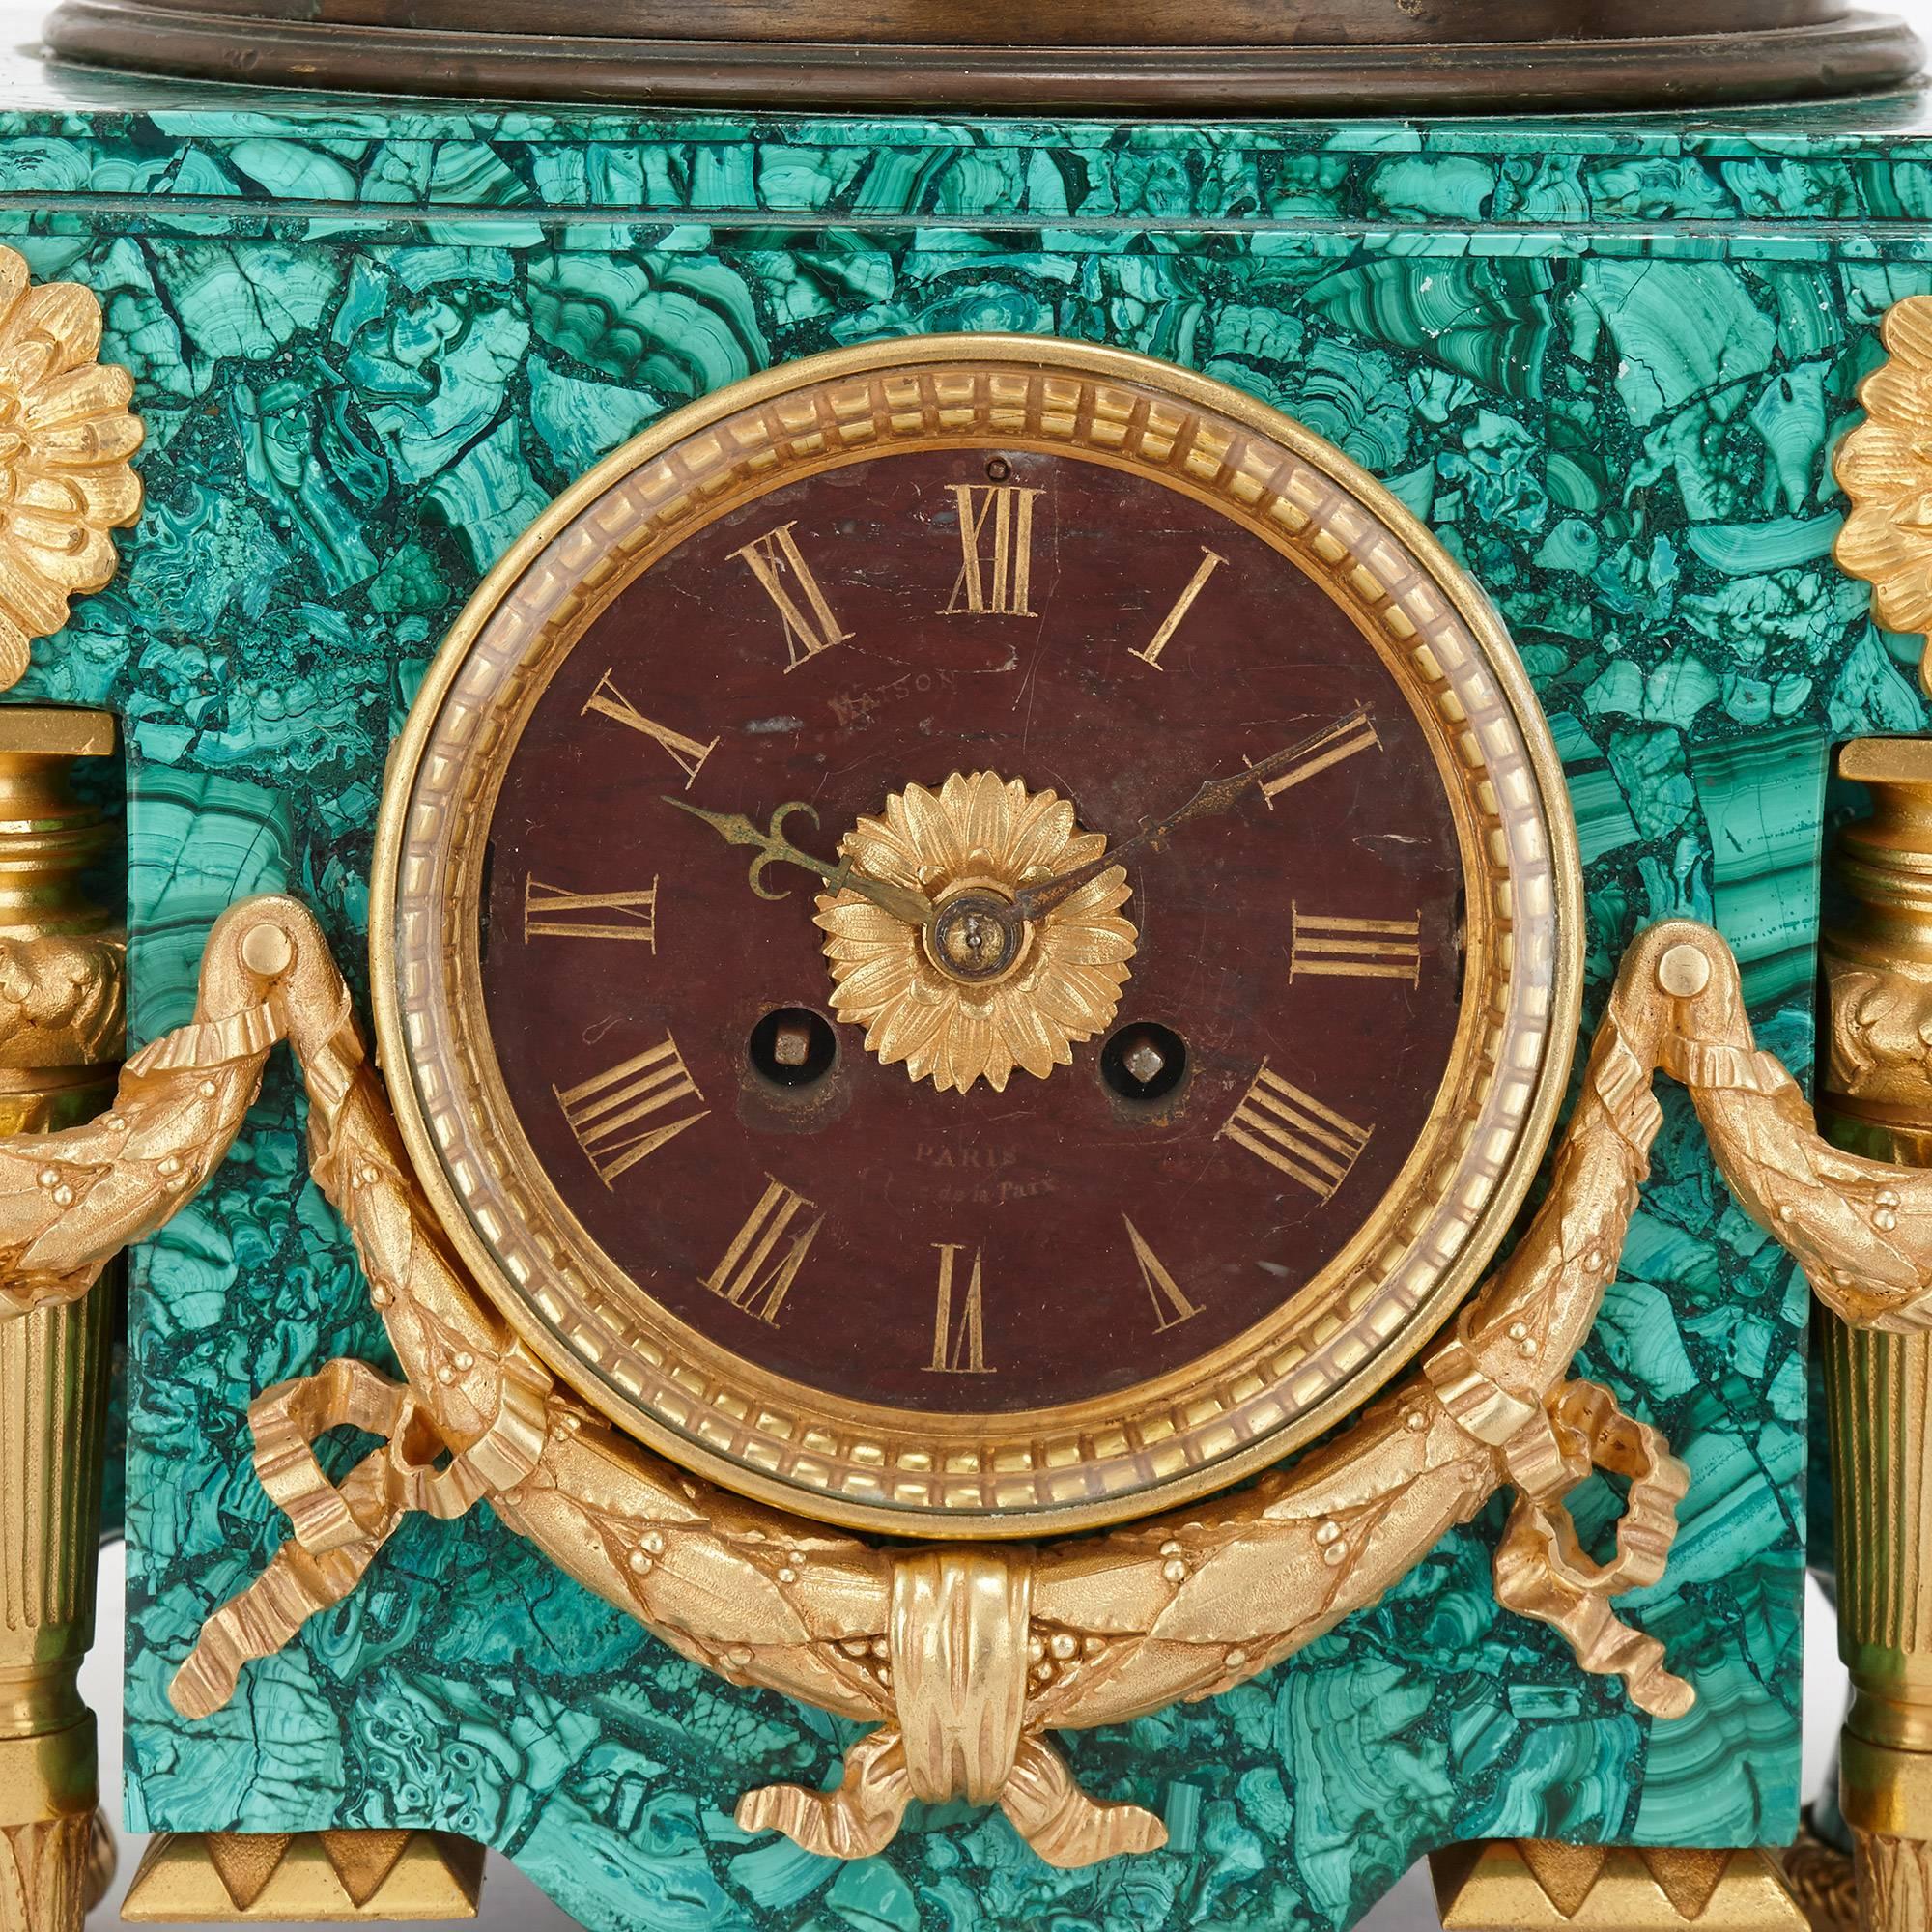 Neoclassical Antique Malachite Mantel Clock with Ormolu Mounts and Patinated Bronze Sculpture